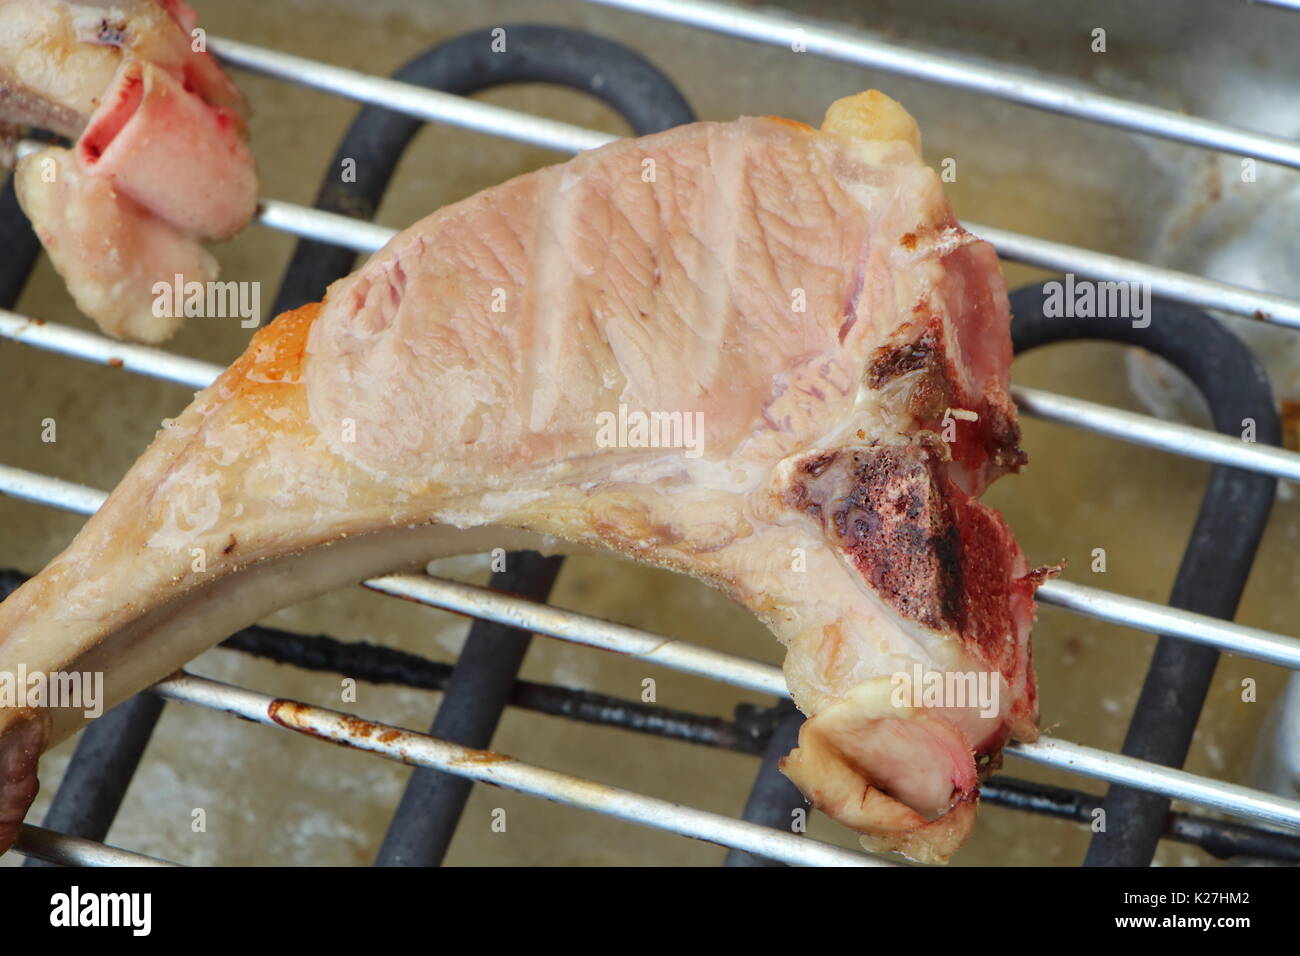 Lamb chops on the rack of an electric barbecue during summer Stock Photo